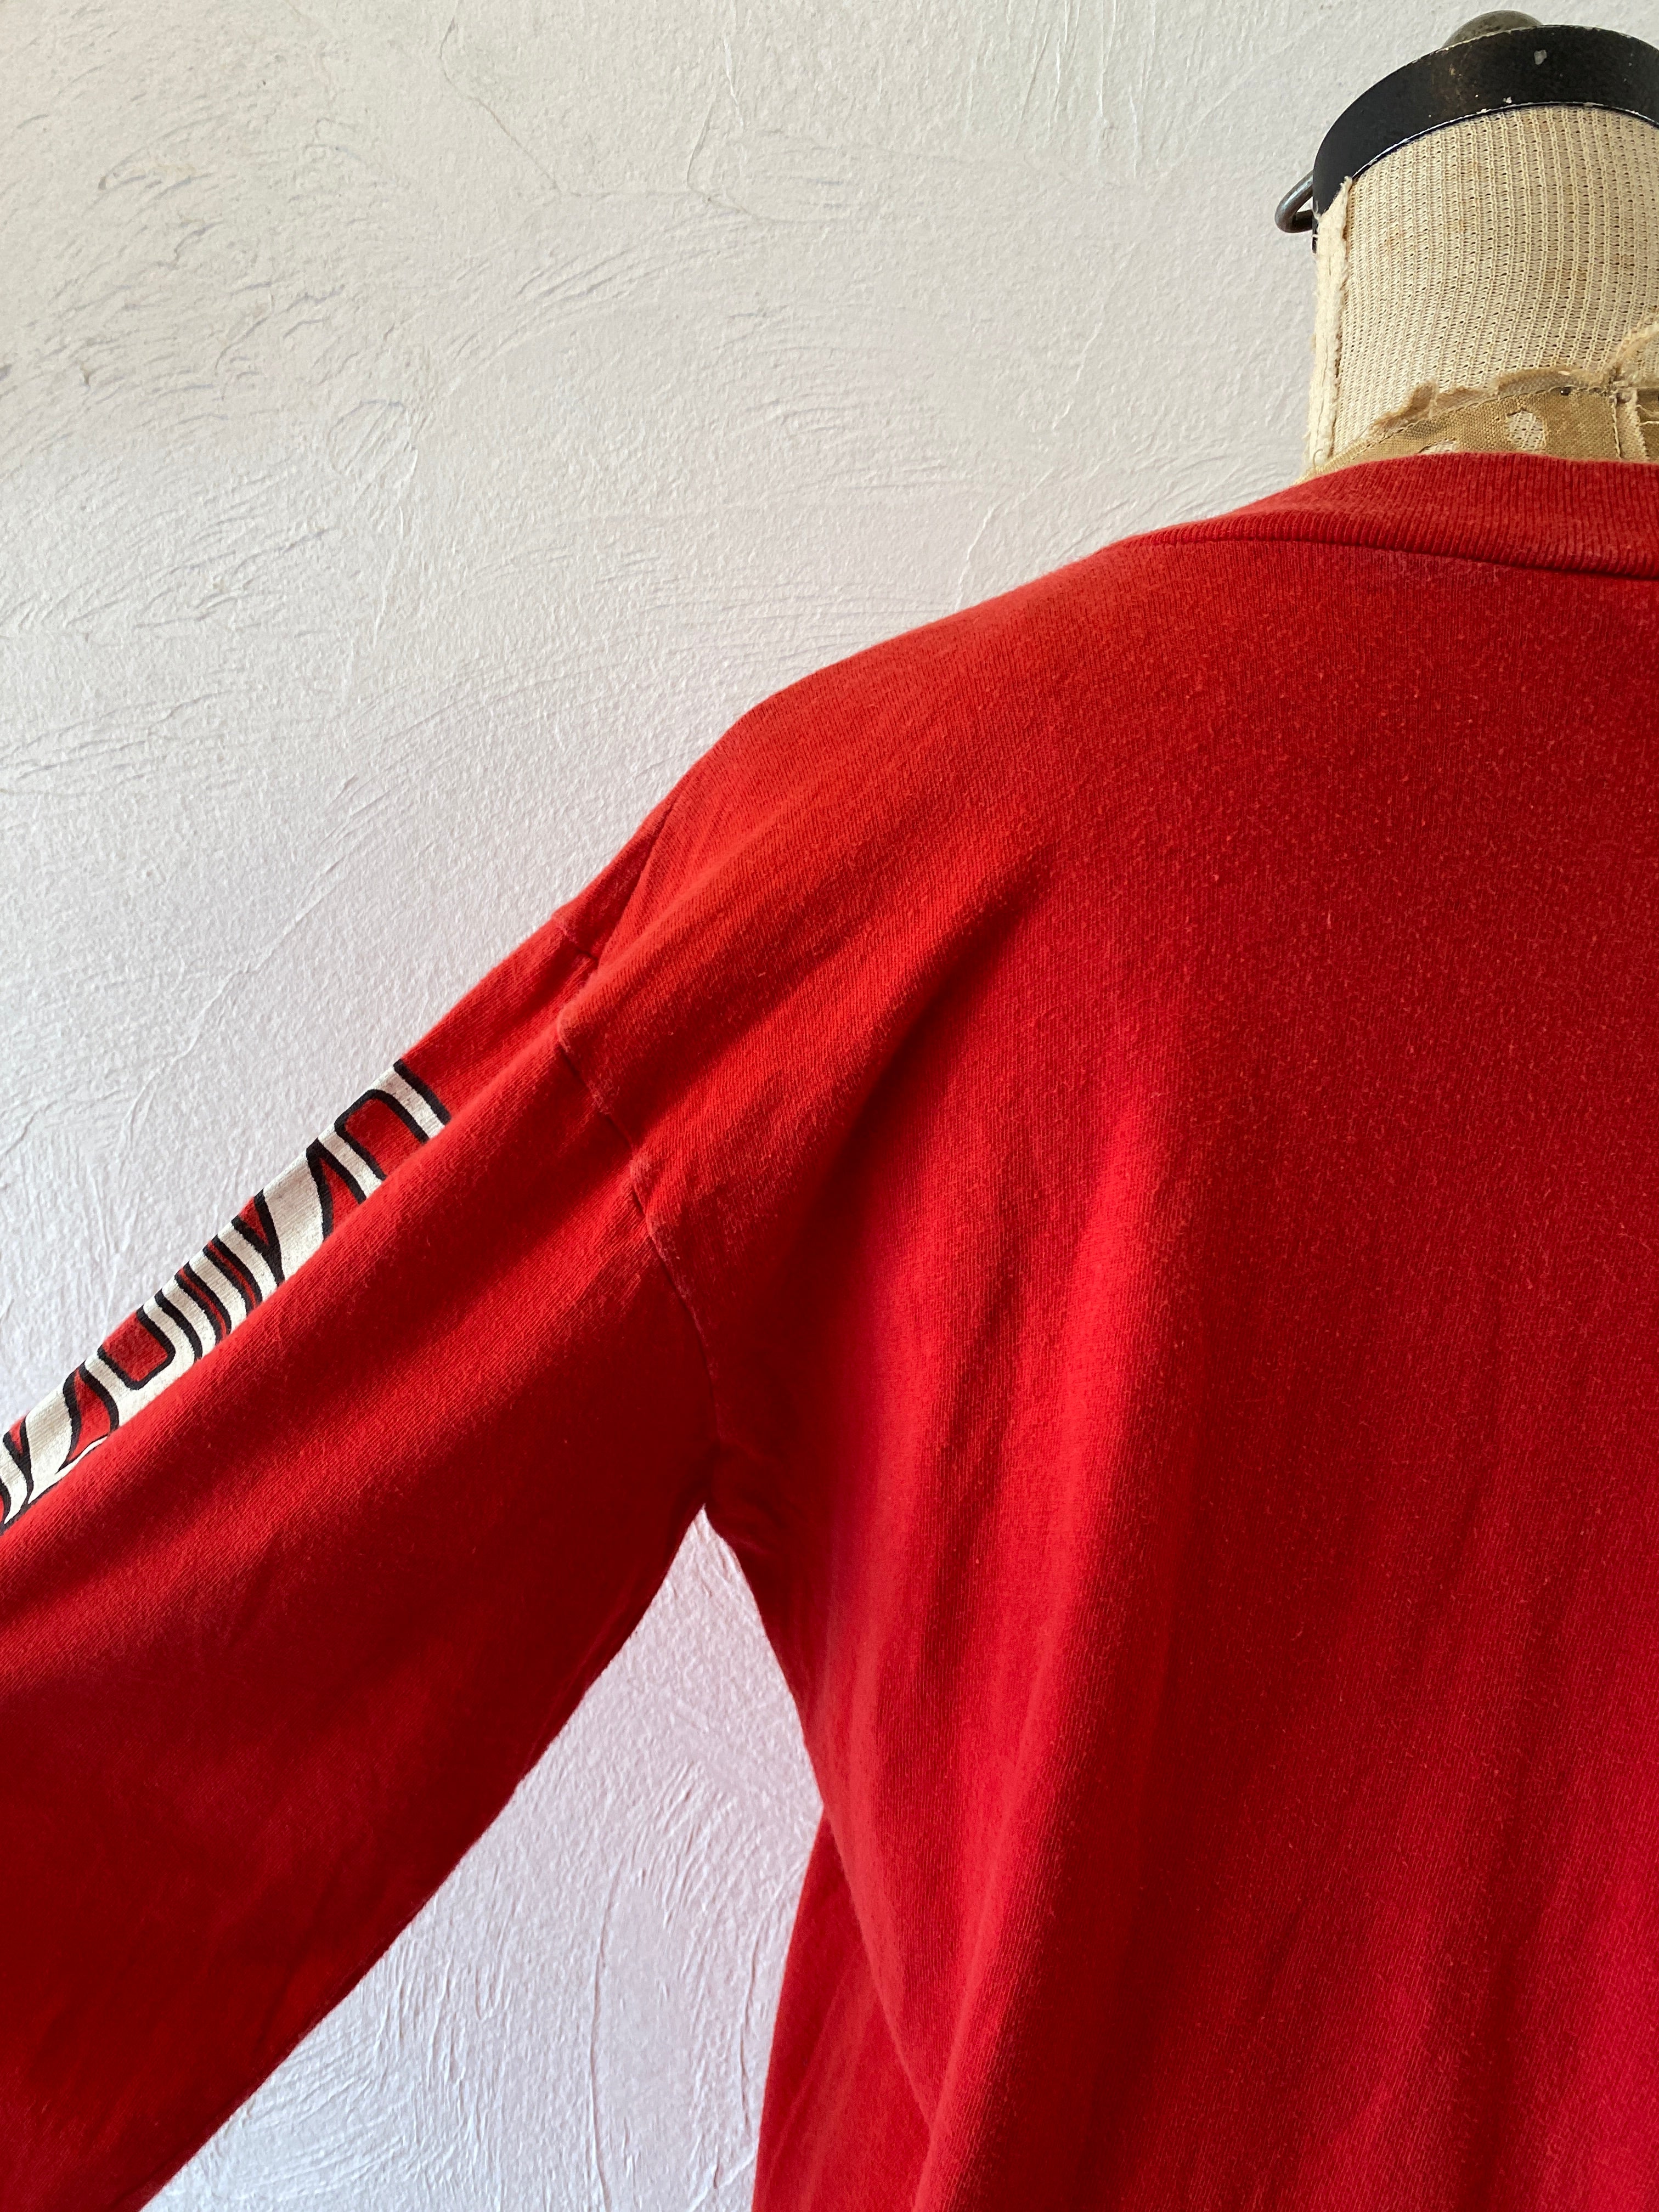 red long sleeve T